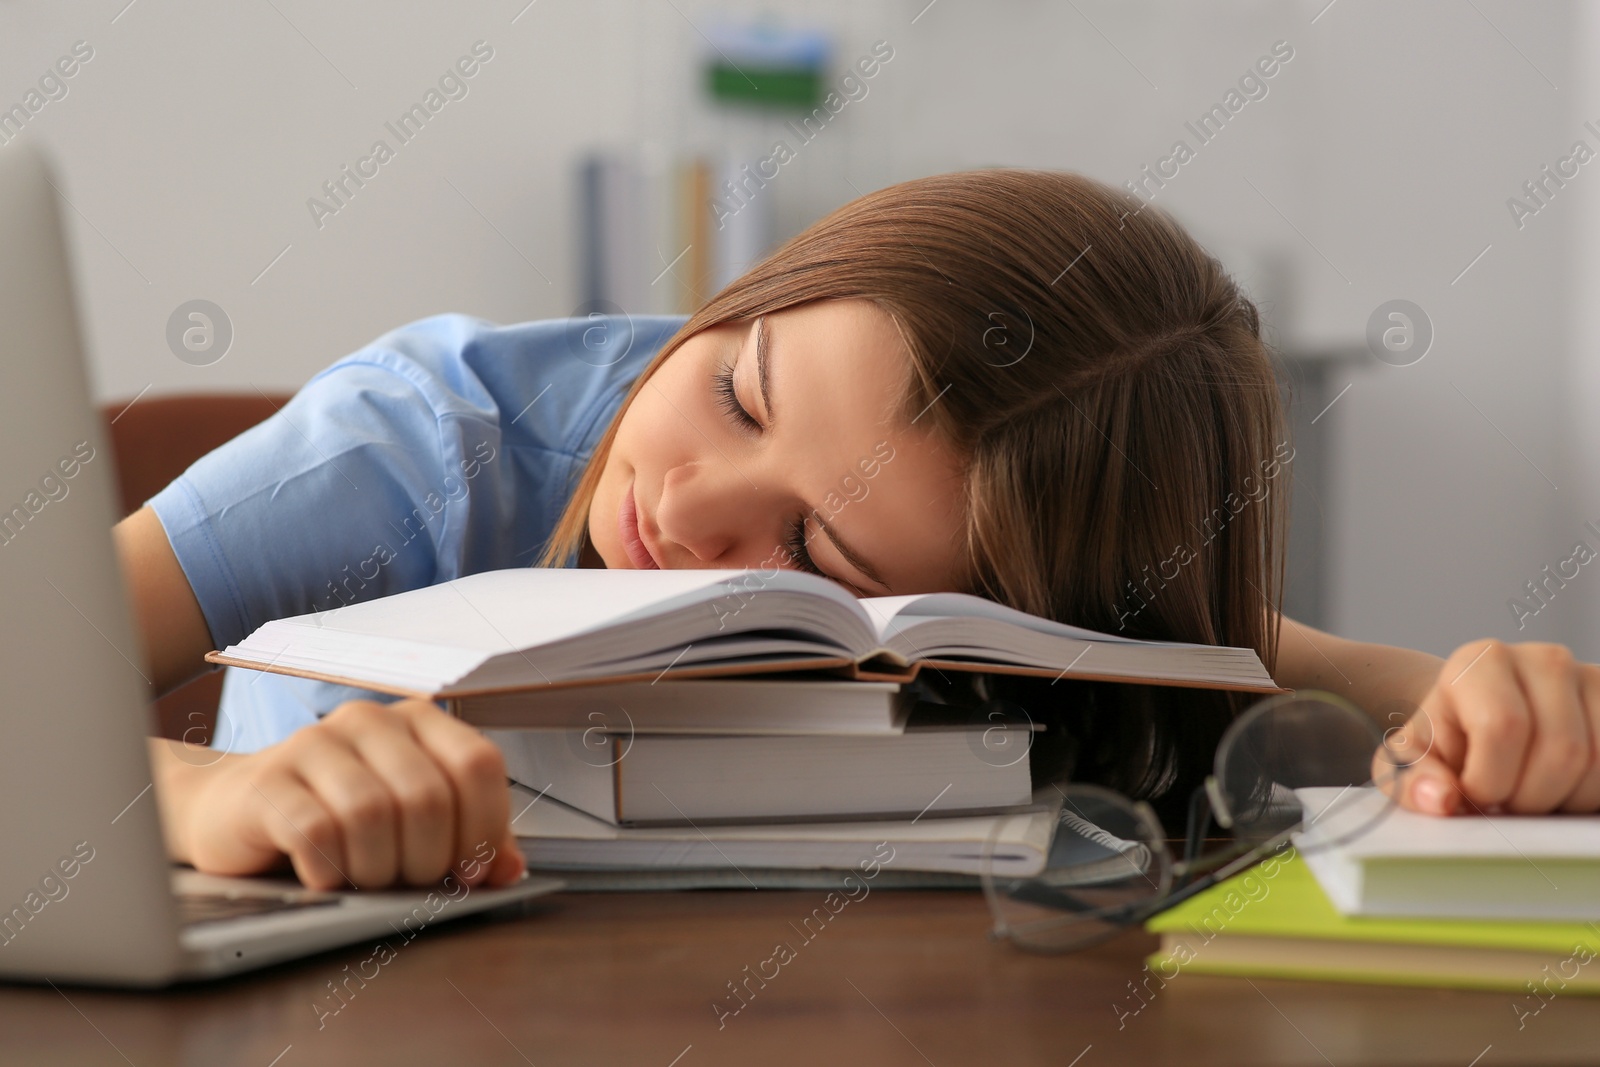 Photo of Young tired woman sleeping near books at wooden table indoors